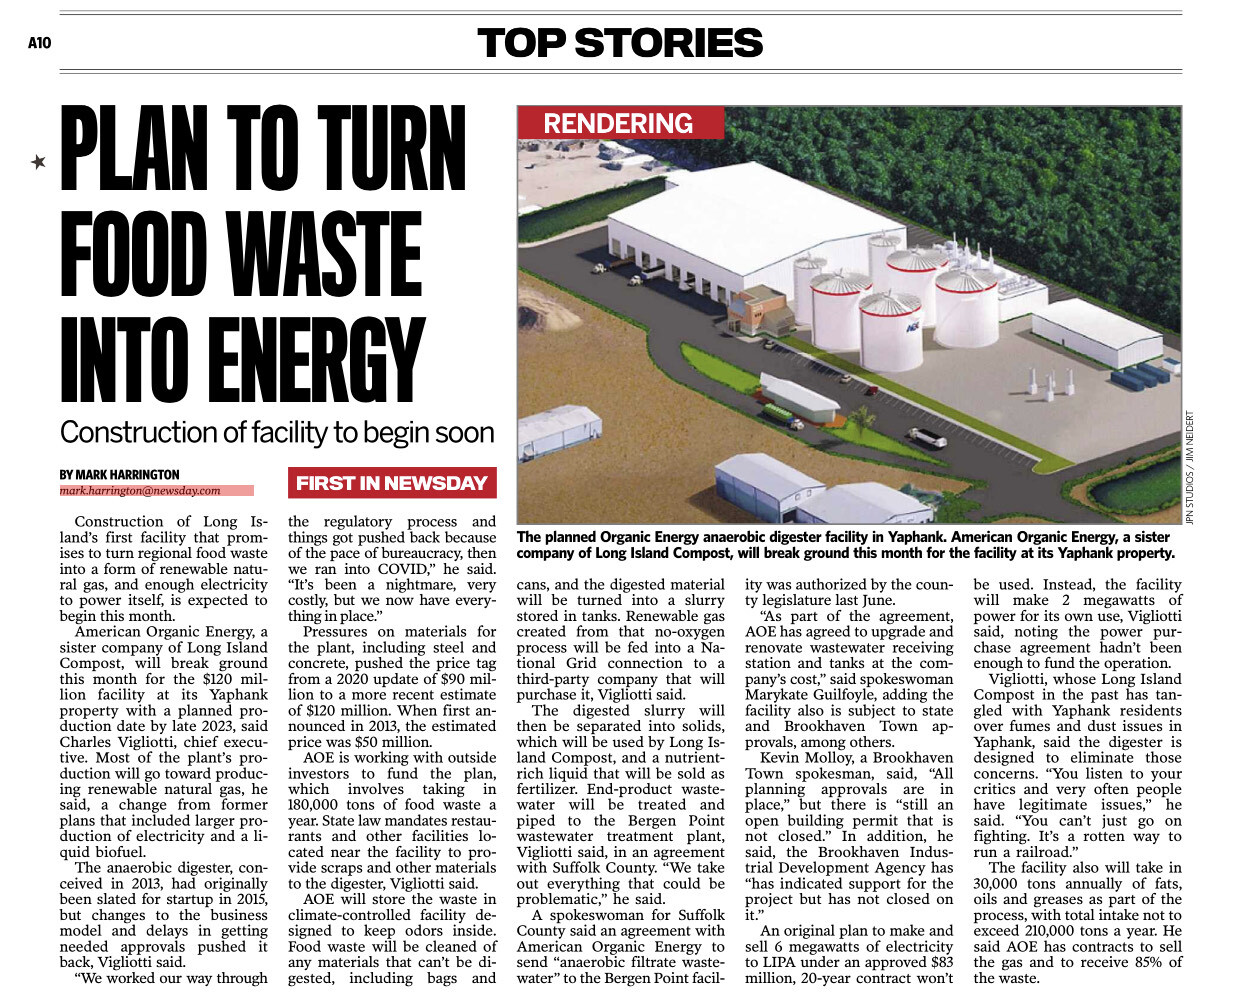 newsday-anerobic-digester-press-release-thumbnail